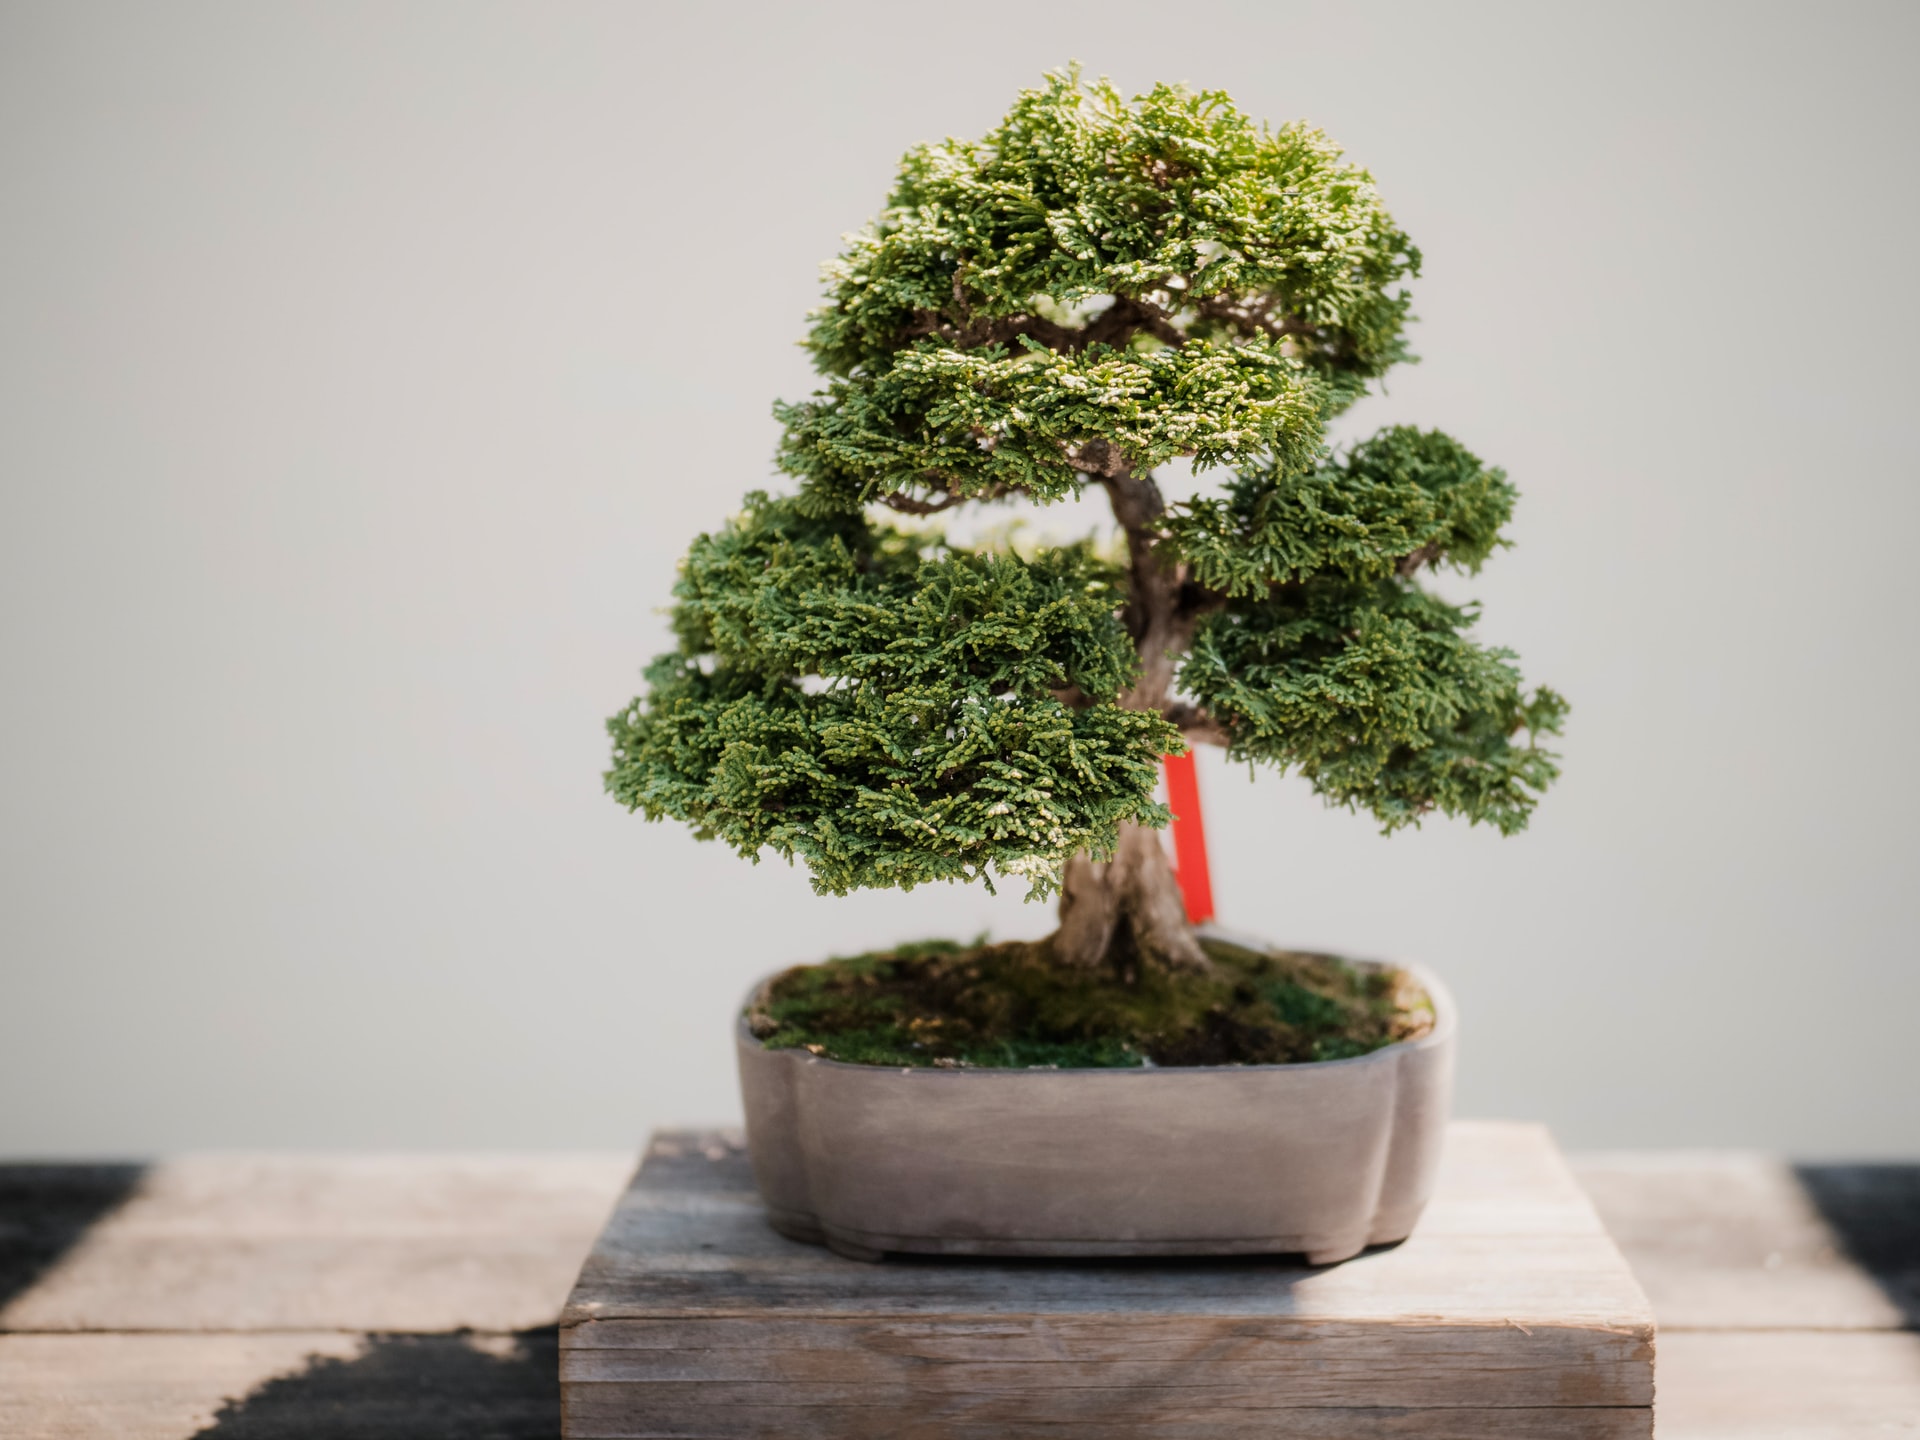 These Tips Will Help You To Know How To Take Care Of Your Bonsai Tree